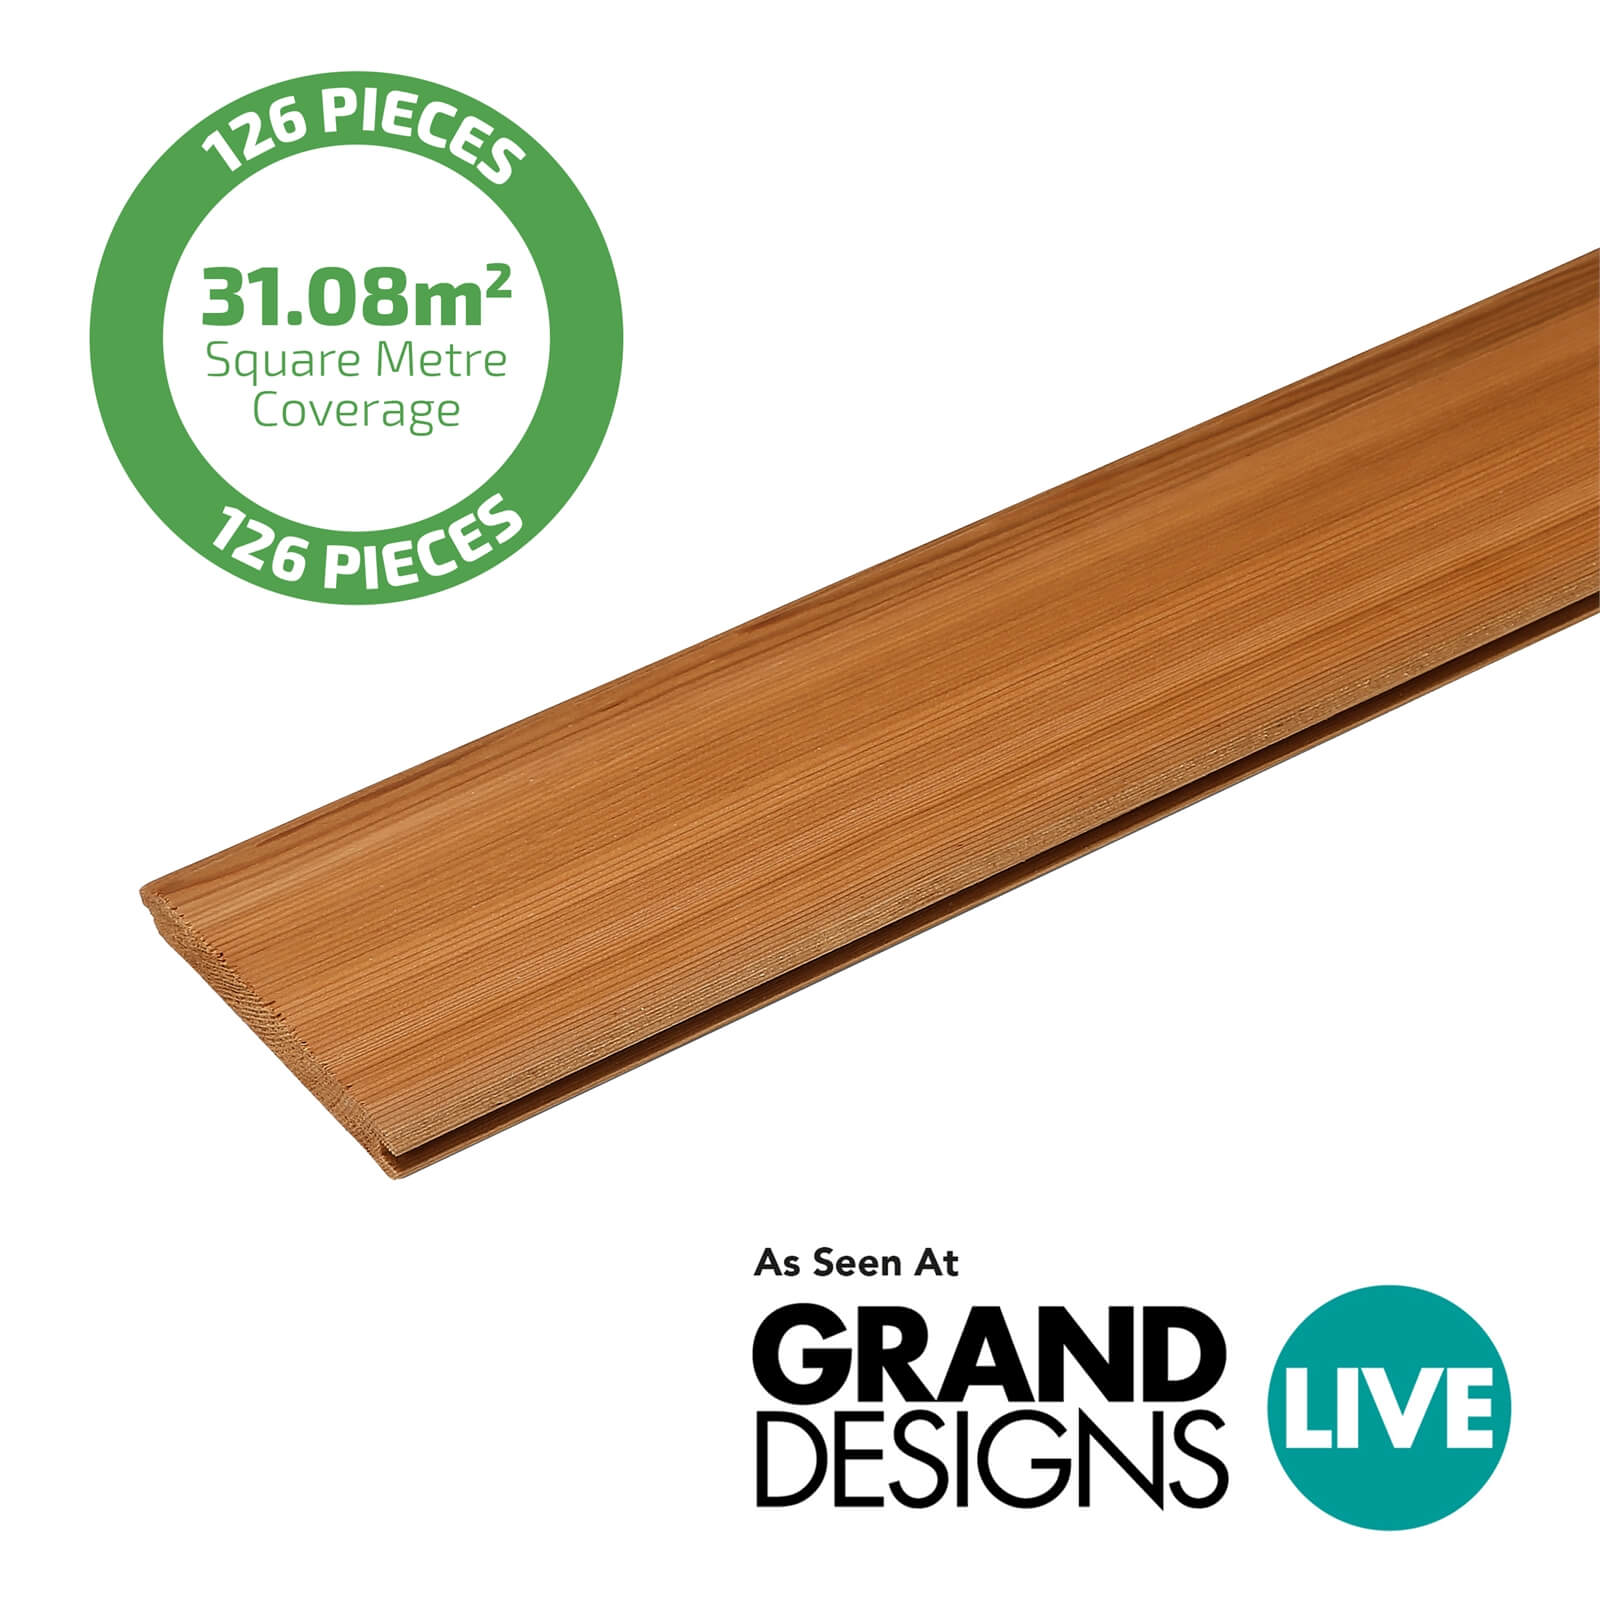 Western Red Cedar Cladding SertiWOOD Tongue and Groove TGV (126 Pack) 31.08m2